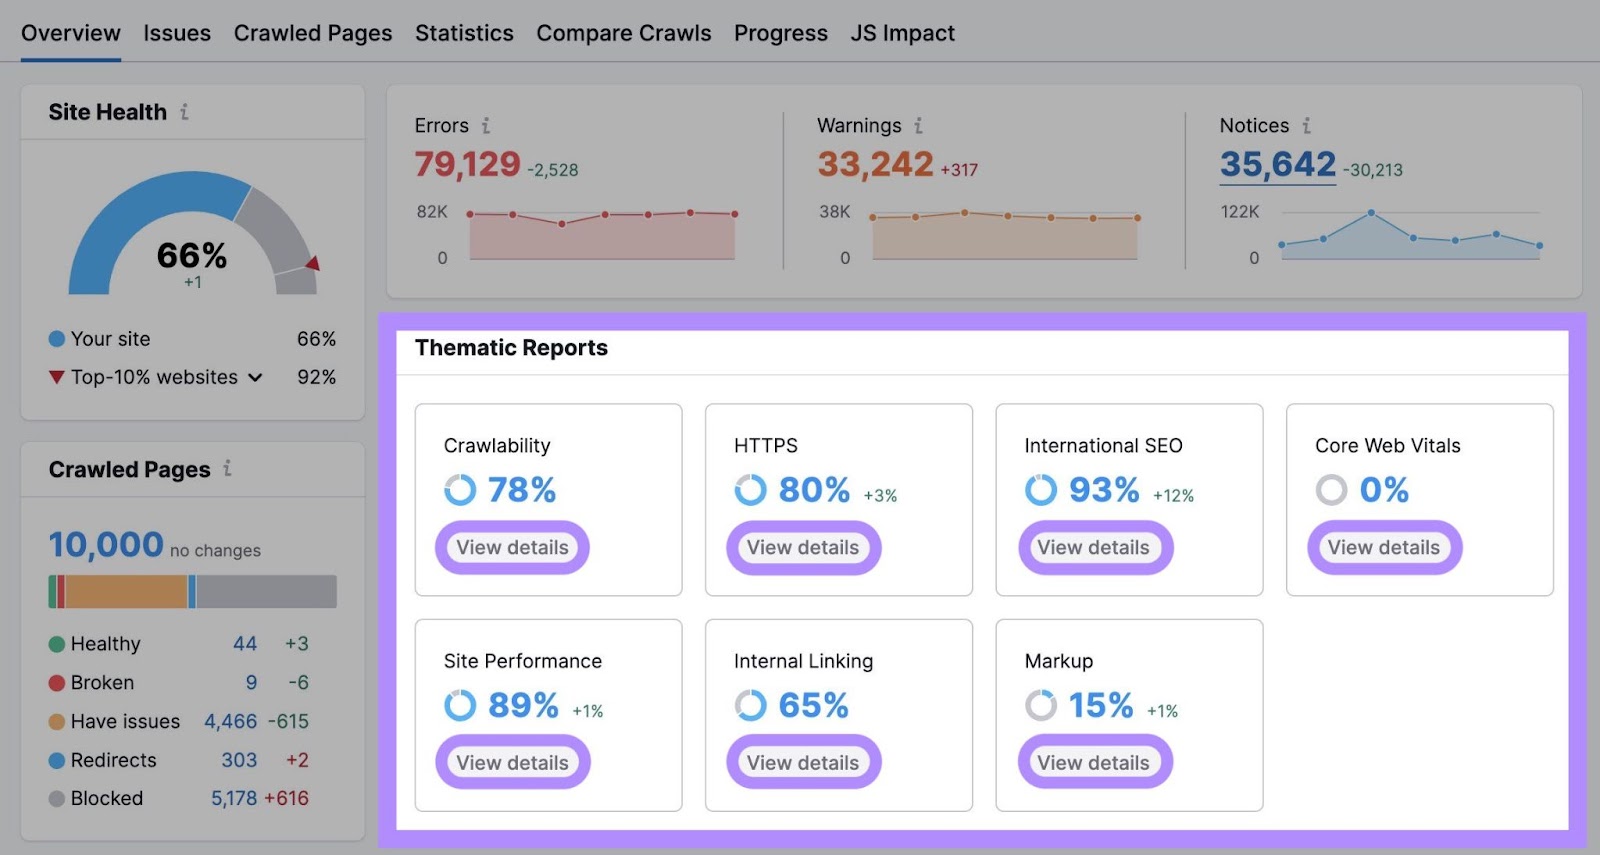 Crawlability, HTTPS, International SEO, Core Web Vitals, Site Performance, Internal Linking, and Markup widgets highlighted nether  "Thematic Reports" section